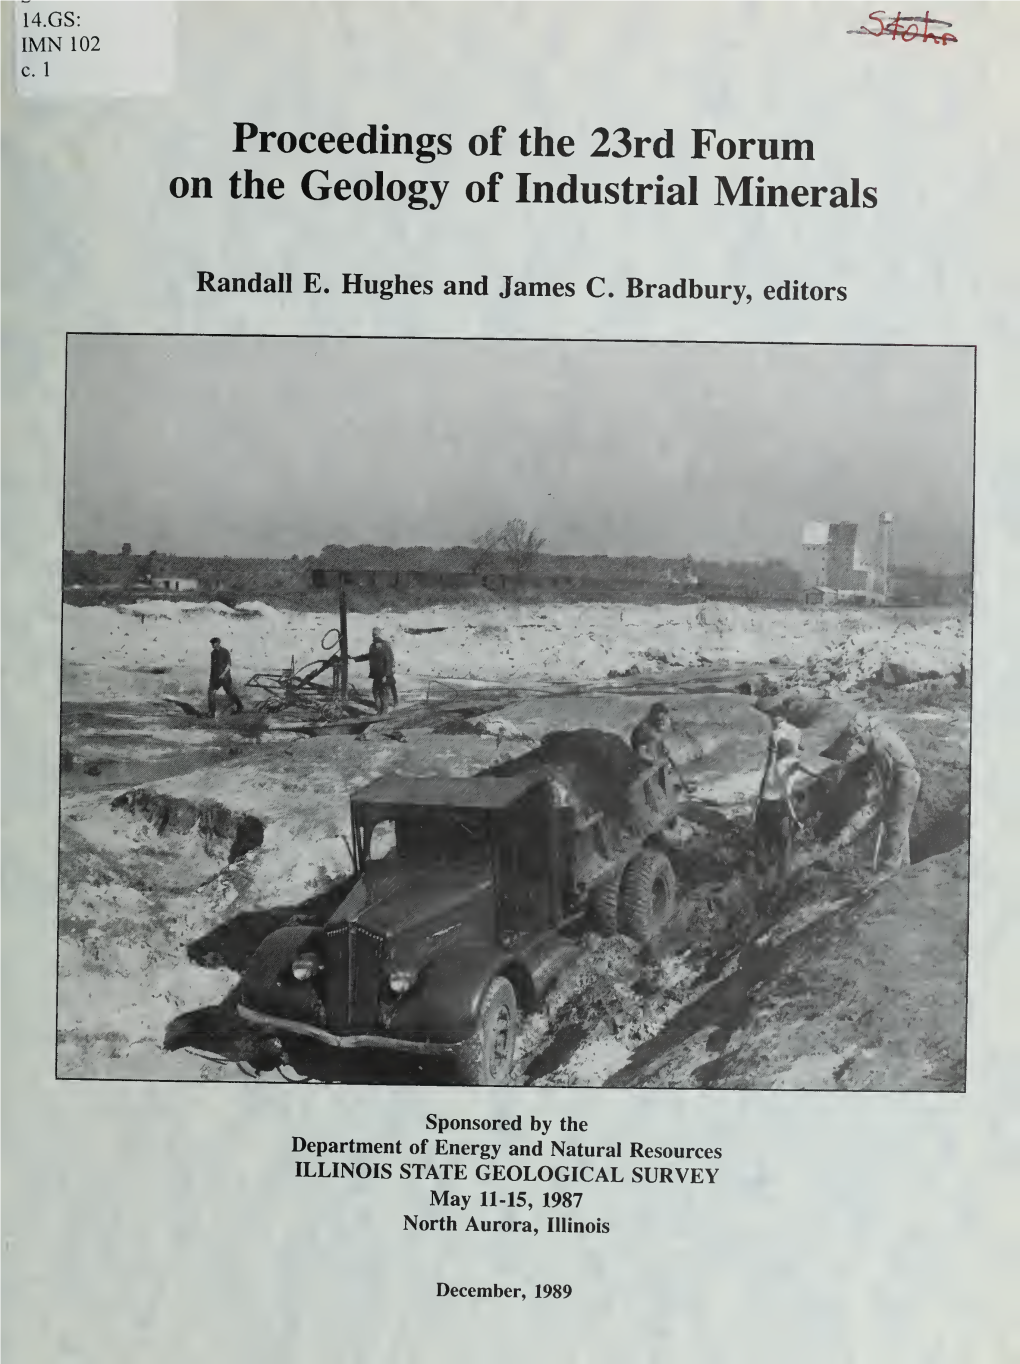 Proceedings of the 23Rd Forum on the Geology of Industrial Minerals, May